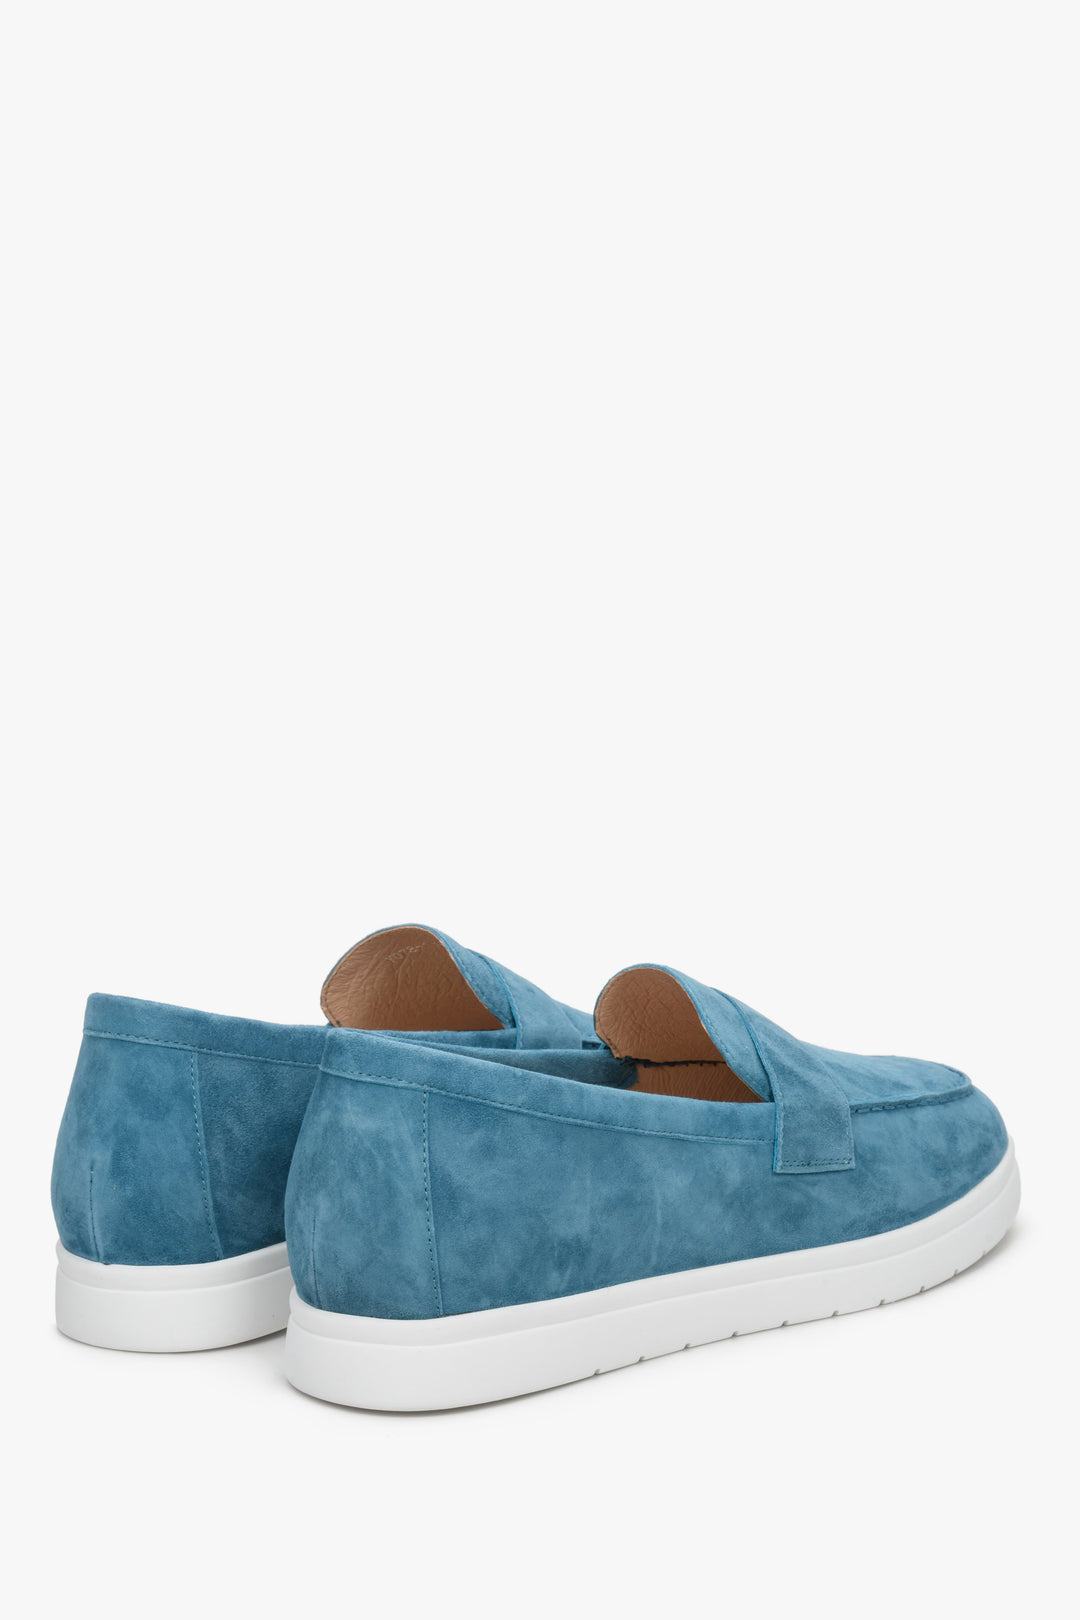 Women's Estro velour moccasins for fall in blue - presentation of the heel and side vamp.